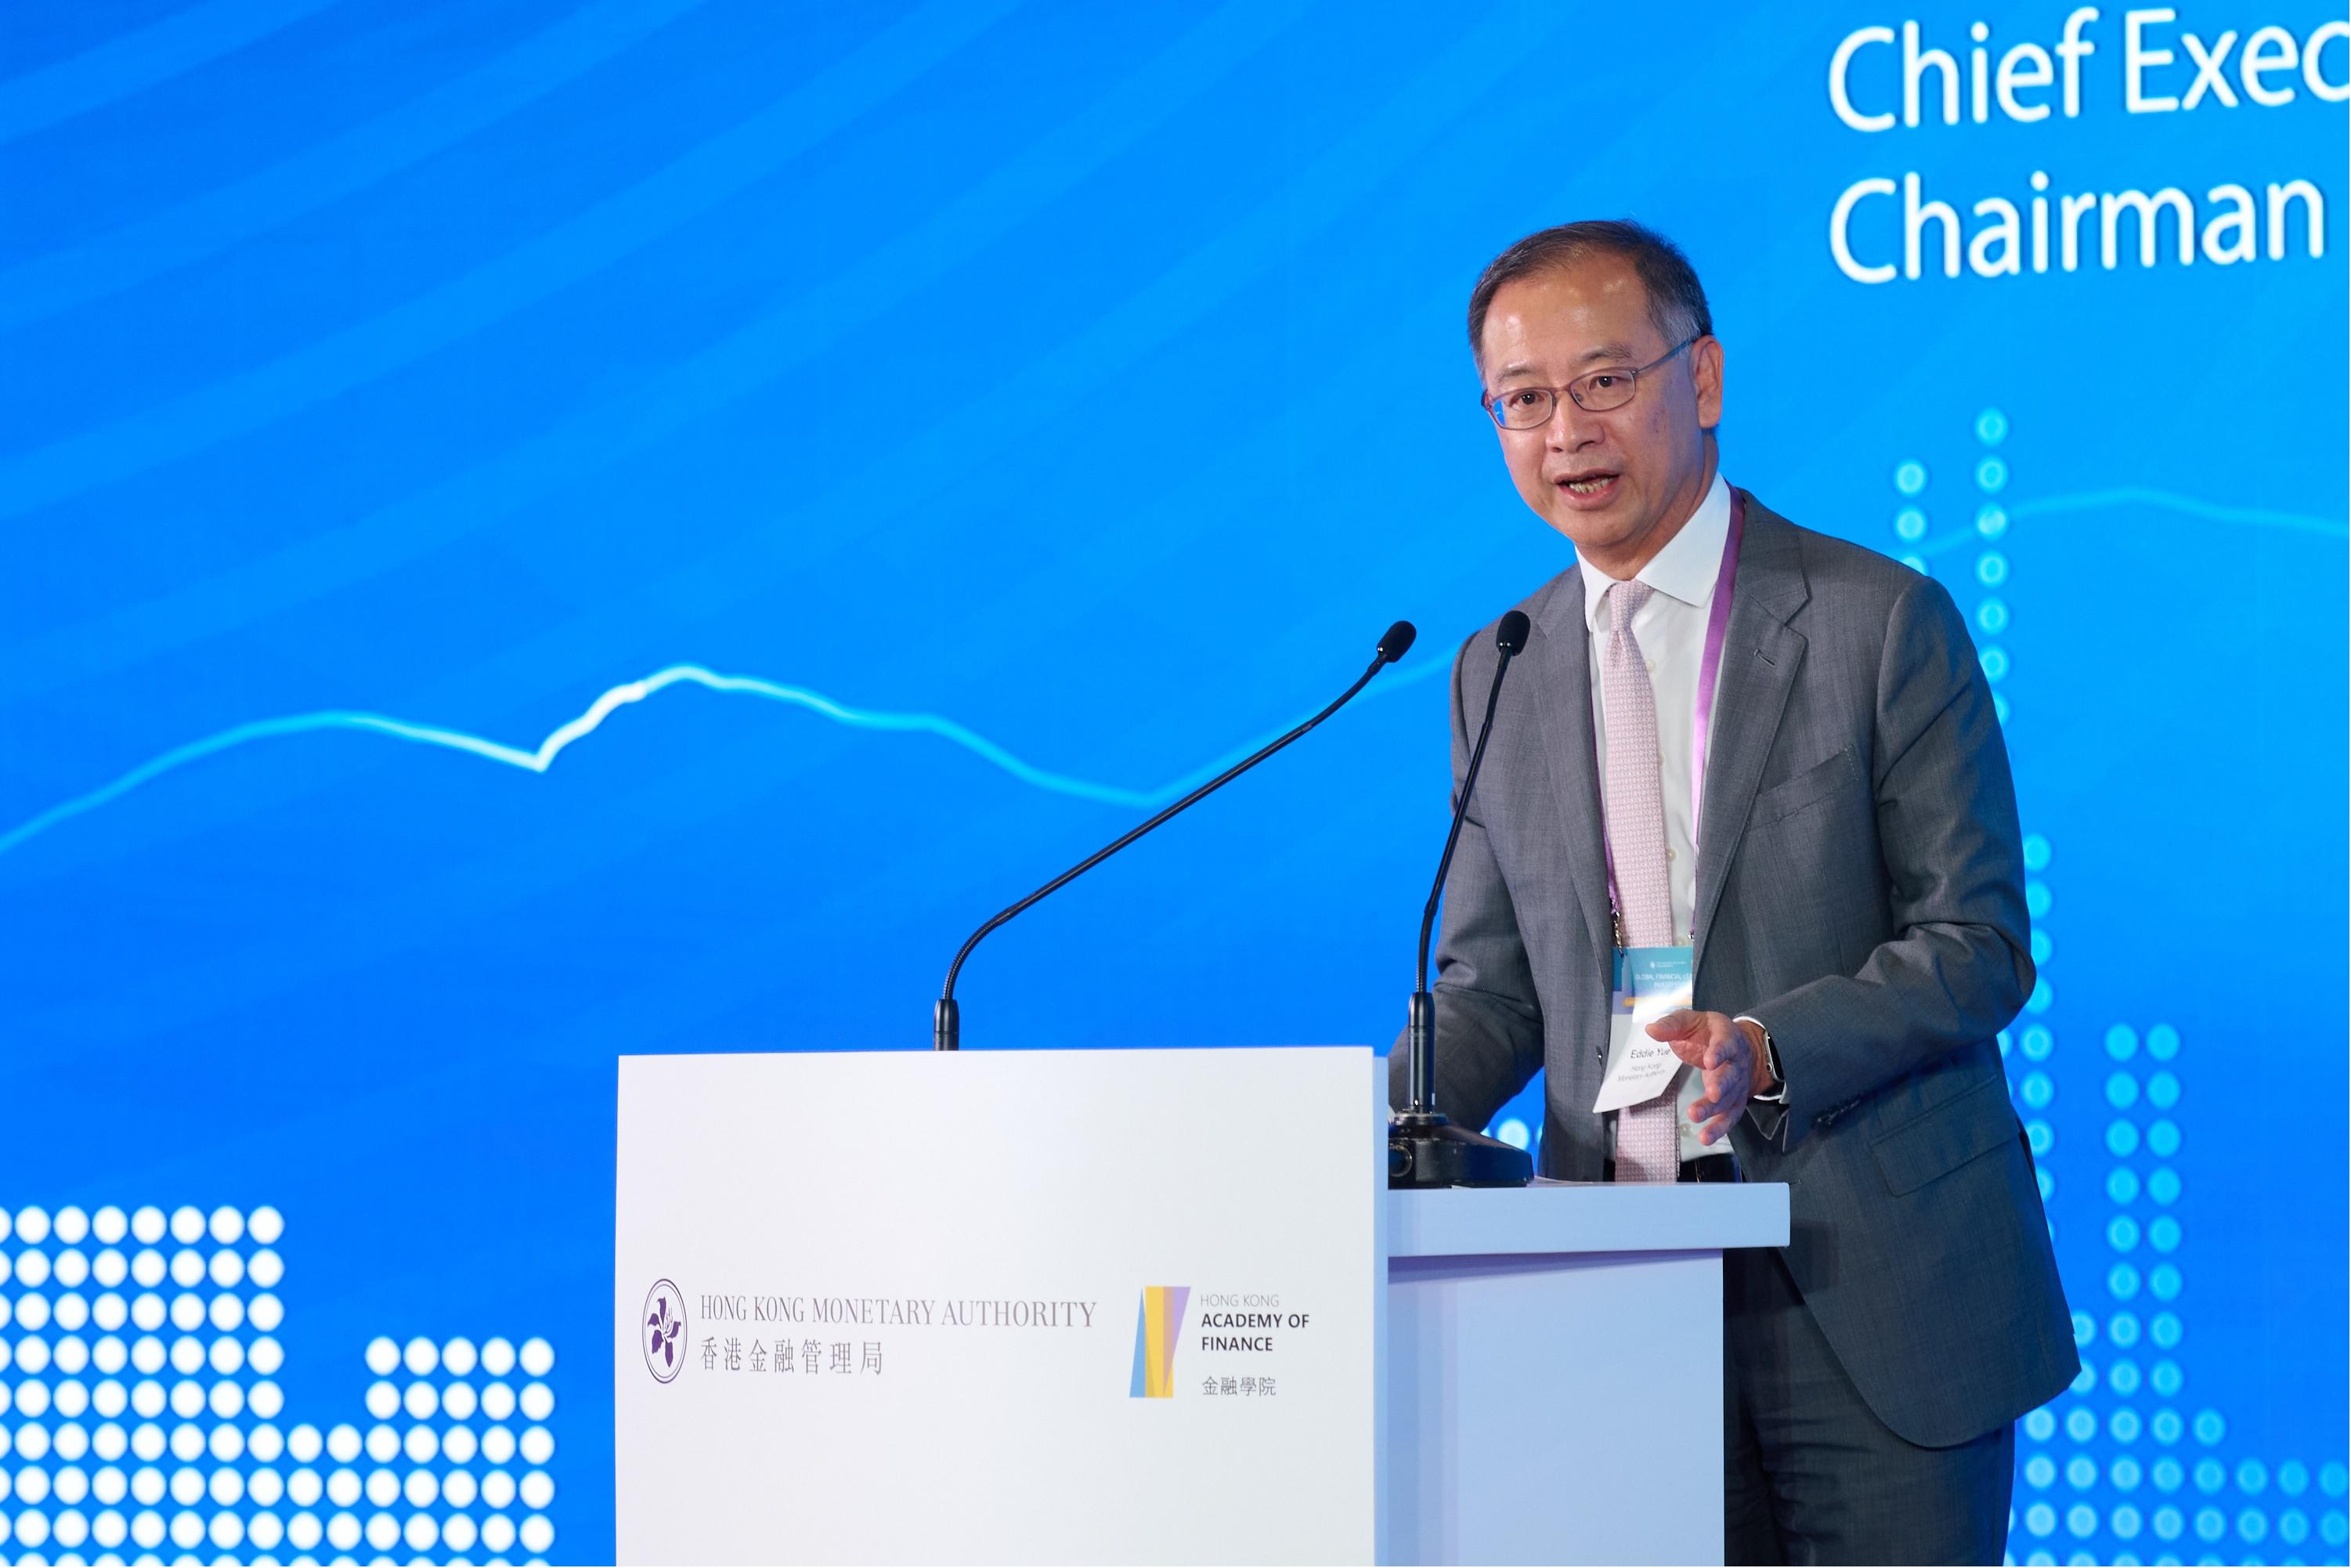 The Chief Executive of the Hong Kong Monetary Authority, Mr Eddie Yue, delivers closing remarks at the "Conversations with Global Investors" seminar of the Global Financial Leaders' Investment Summit today (November 3).


